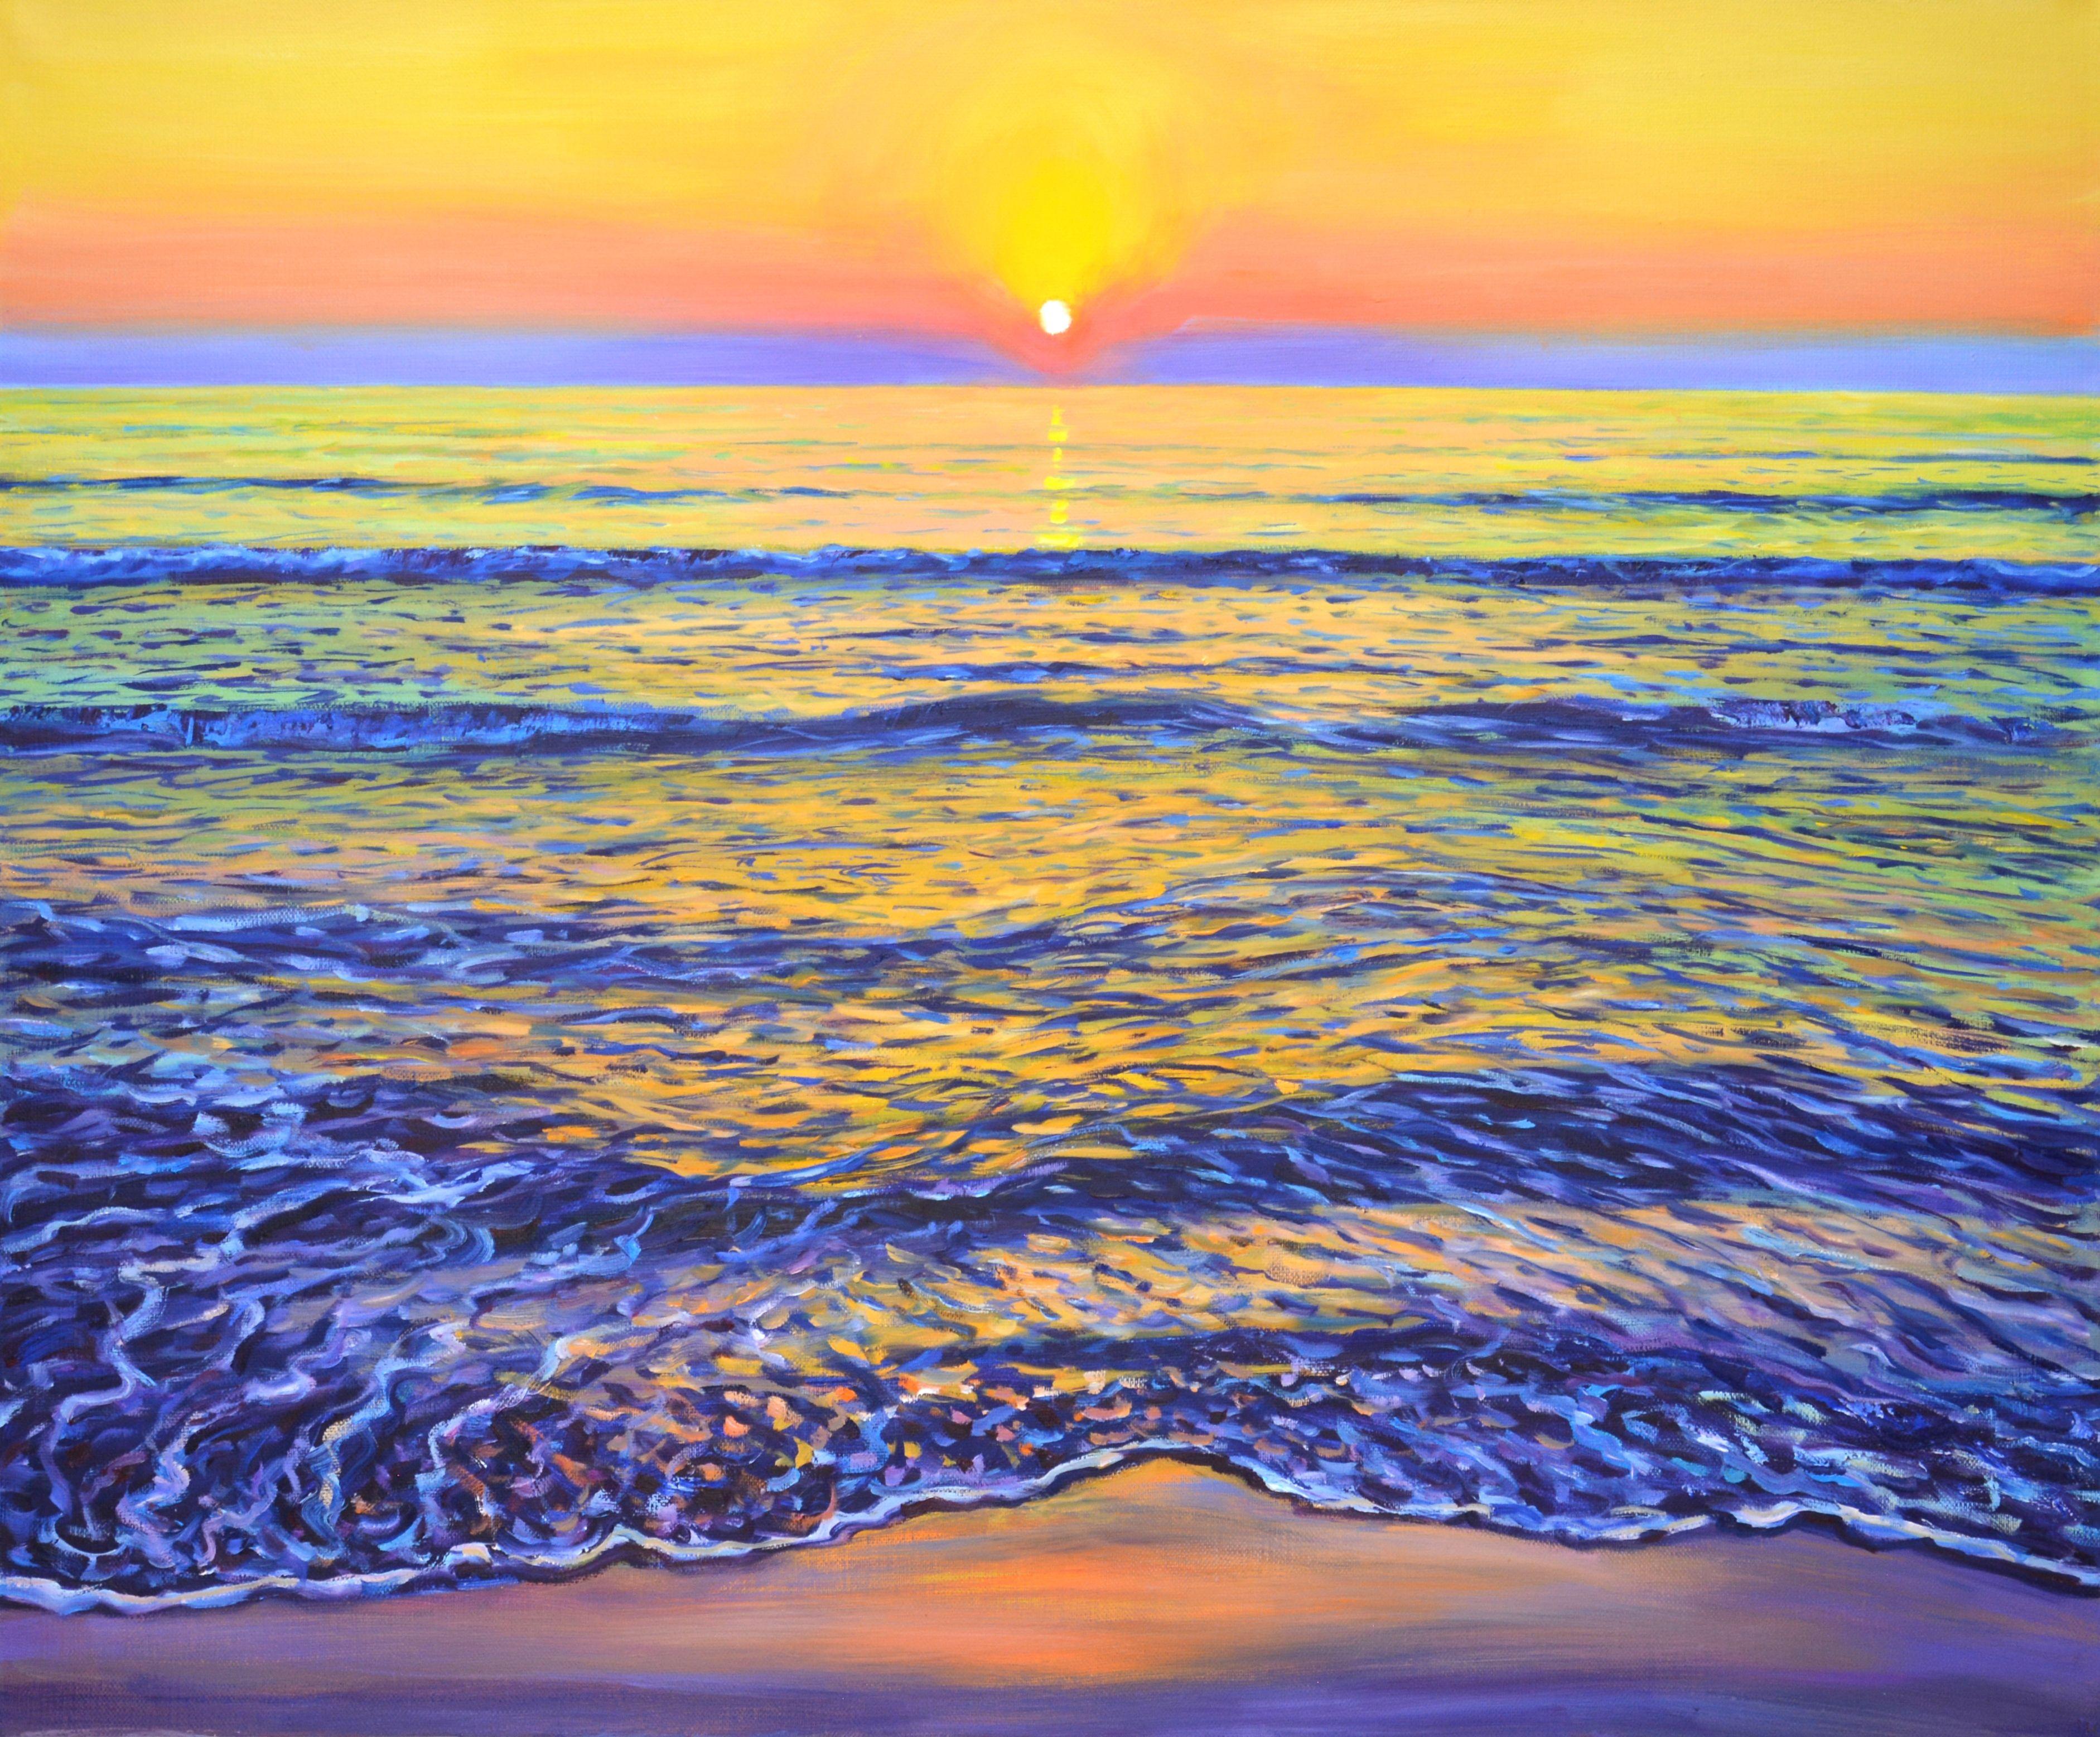 Ocean sunset. When traveling, I study a lot of the sea and the ocean. Then in the workshop I again plunge into a state of admiration for the sea element and paint with oil on a large linen canvas. Ocean sunset, picturesque sky, light waves, sun